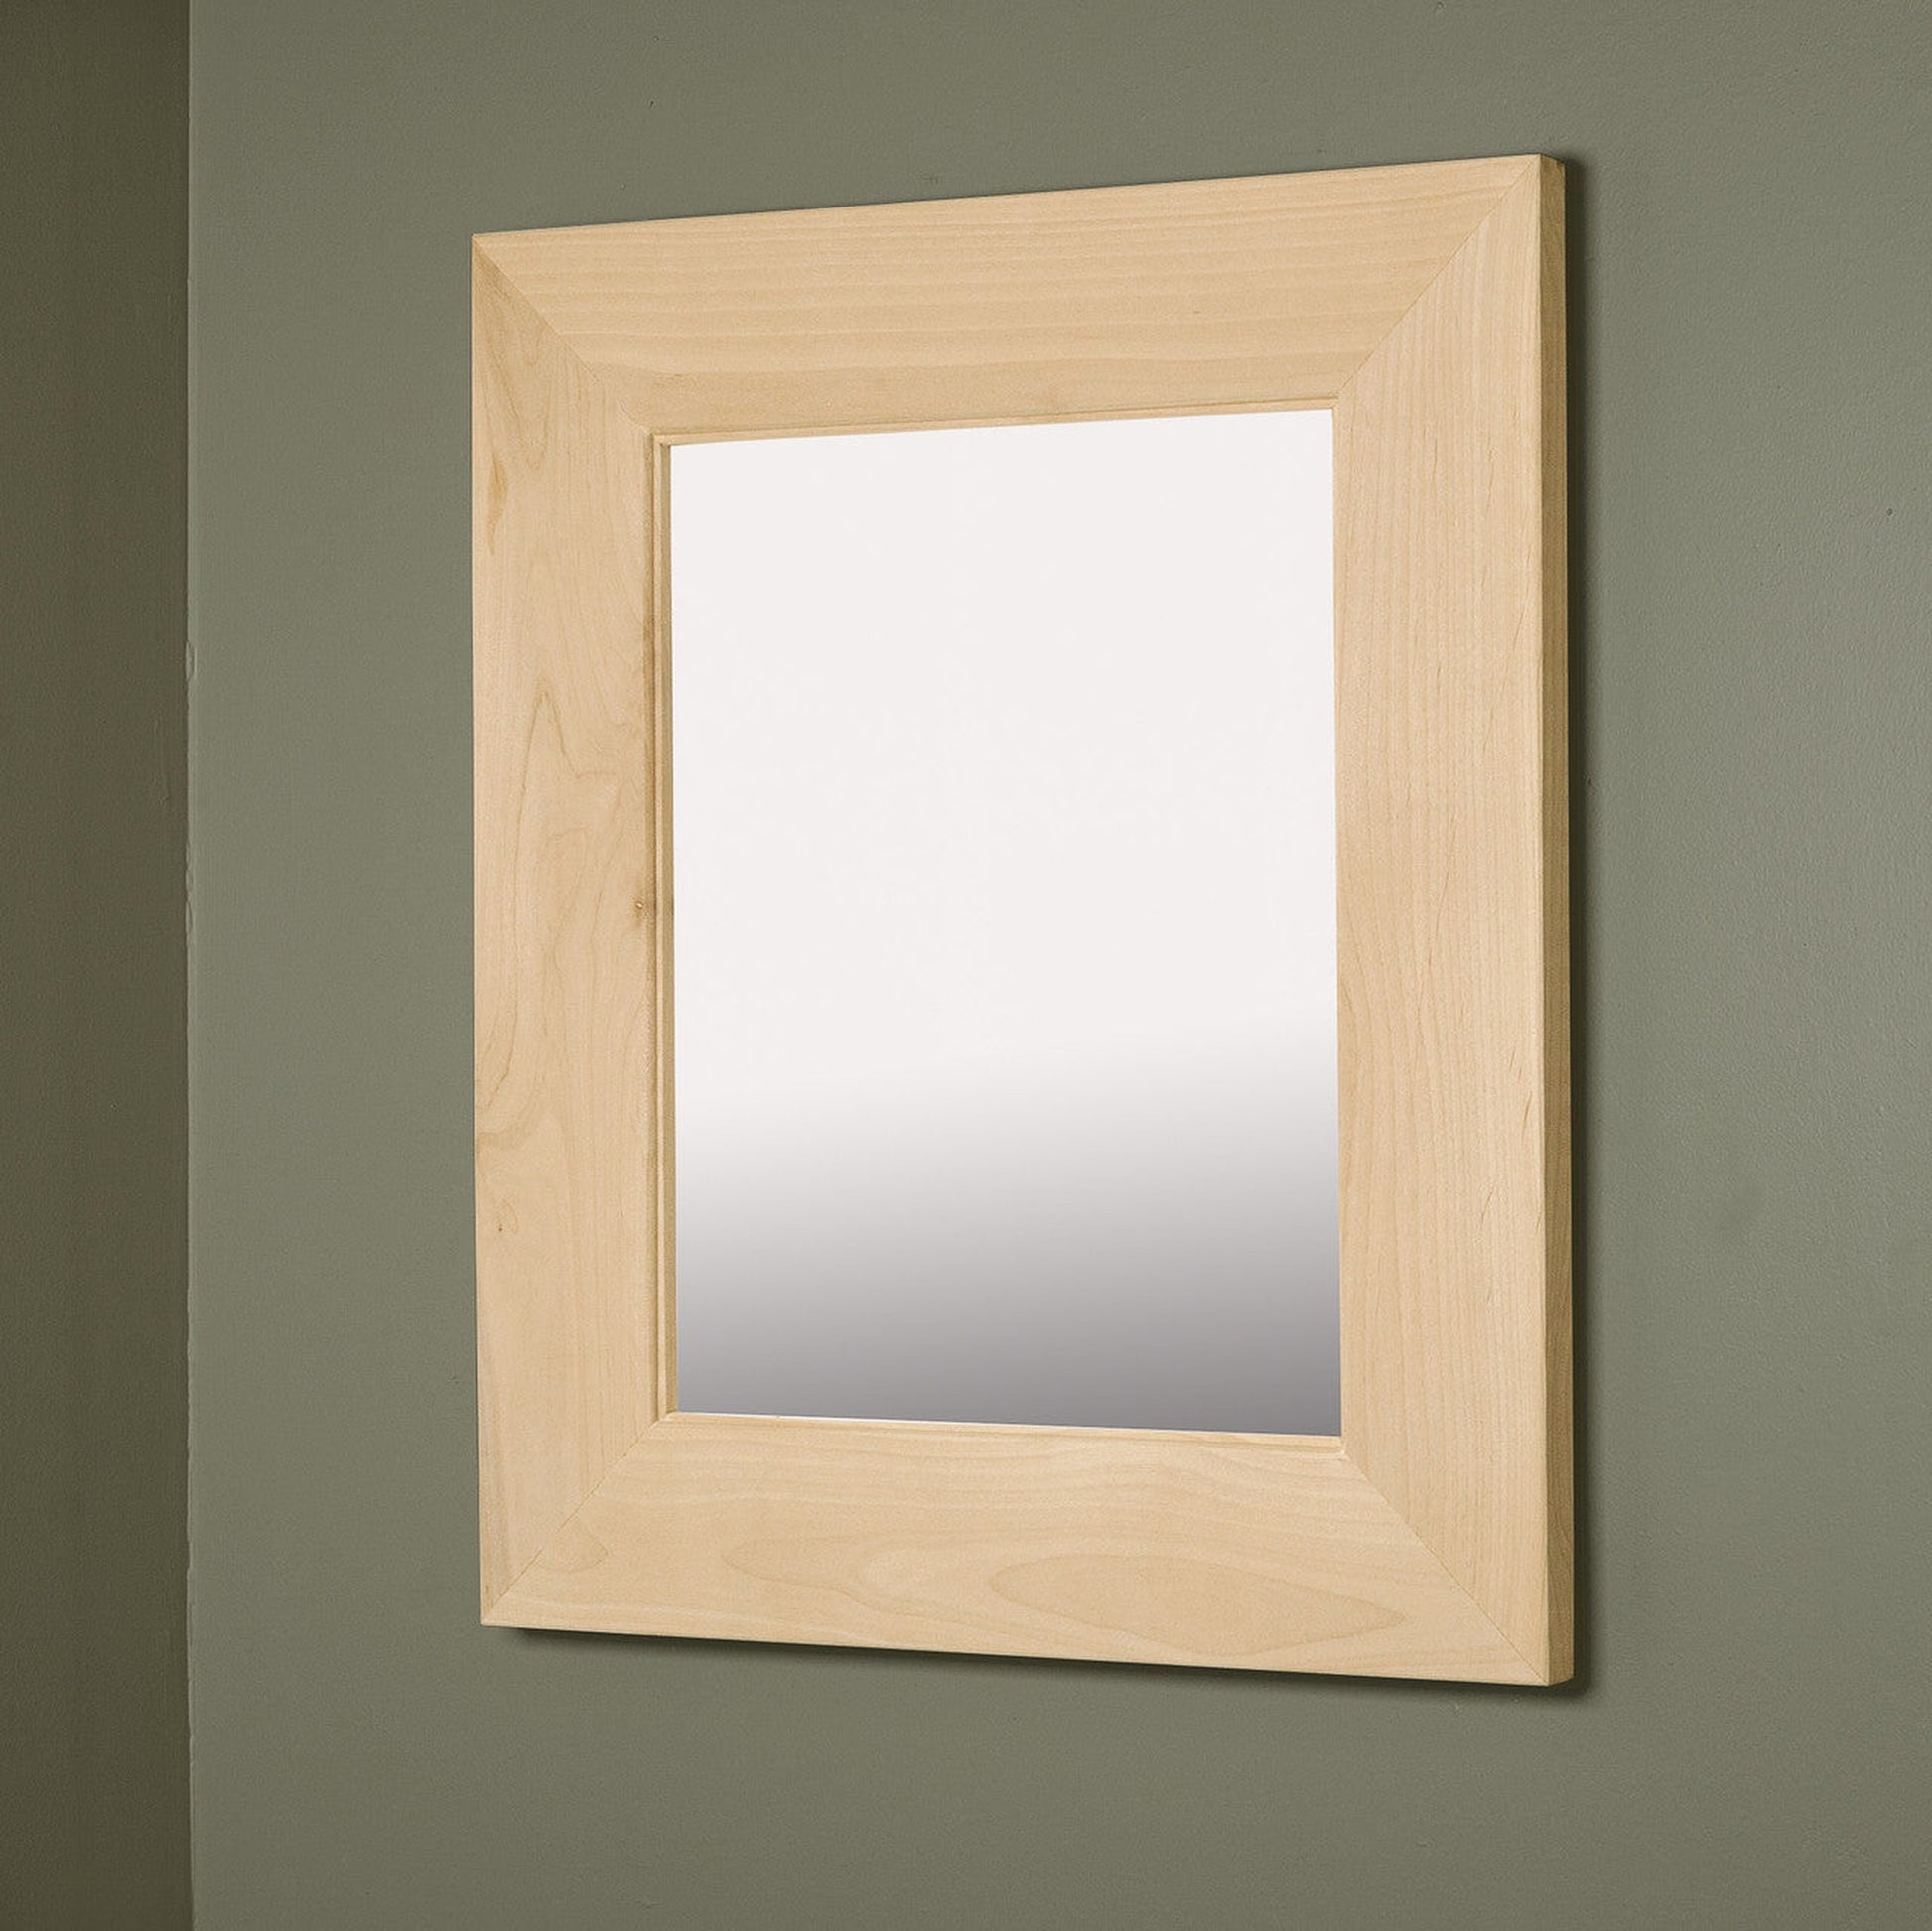 Fox Hollow Furnishings 14" x 18" Unfinished Flat Edge Special 6" Depth White Interior Mirrored Medicine Cabinet